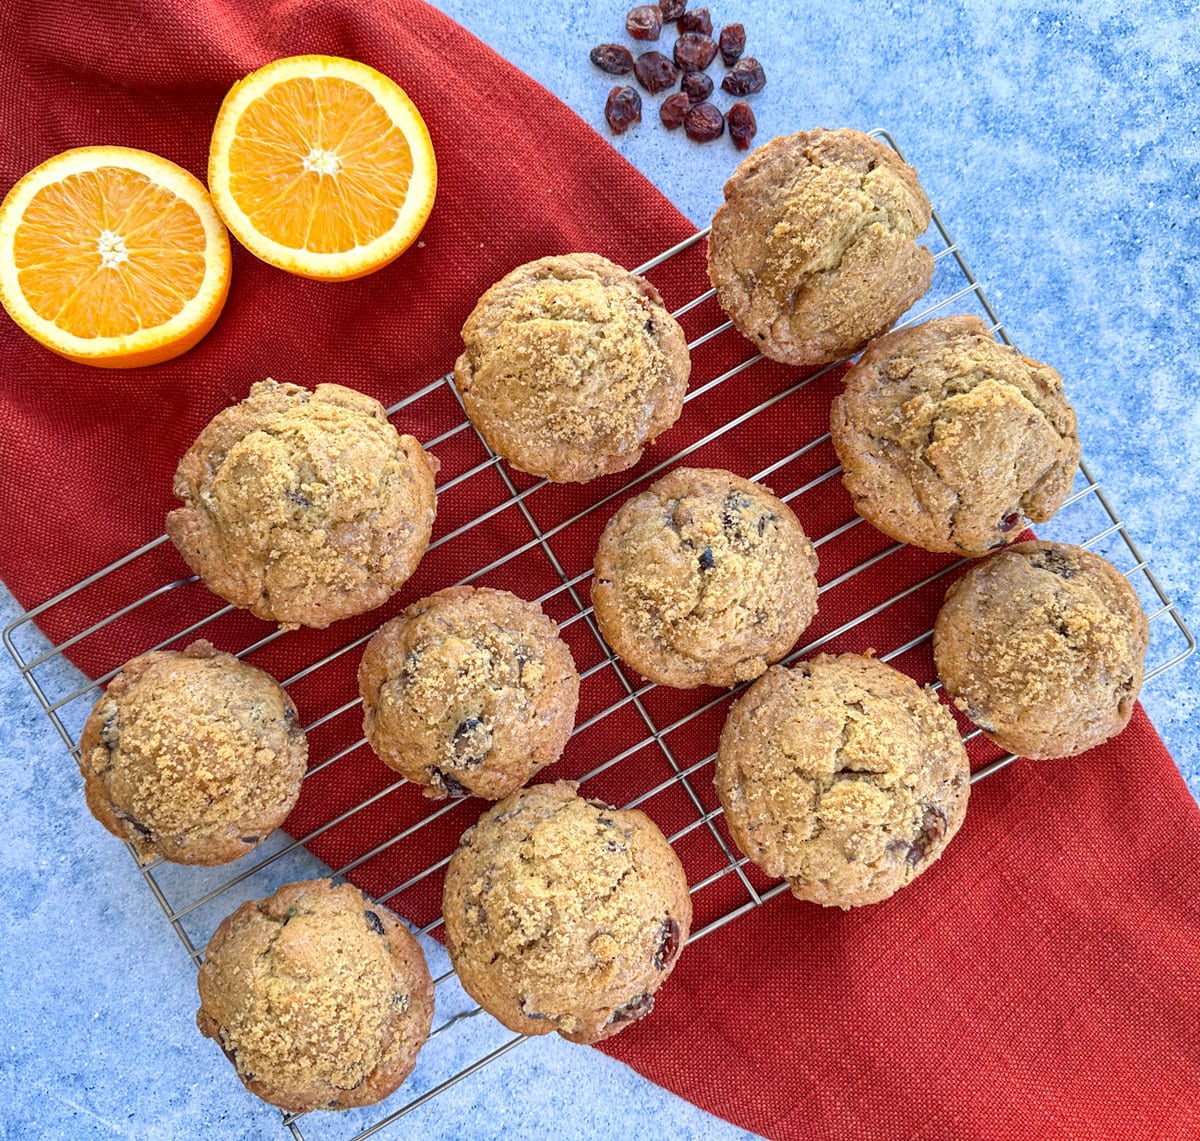 A cooling rack on a red and blue background showing muffins fresh from the oven